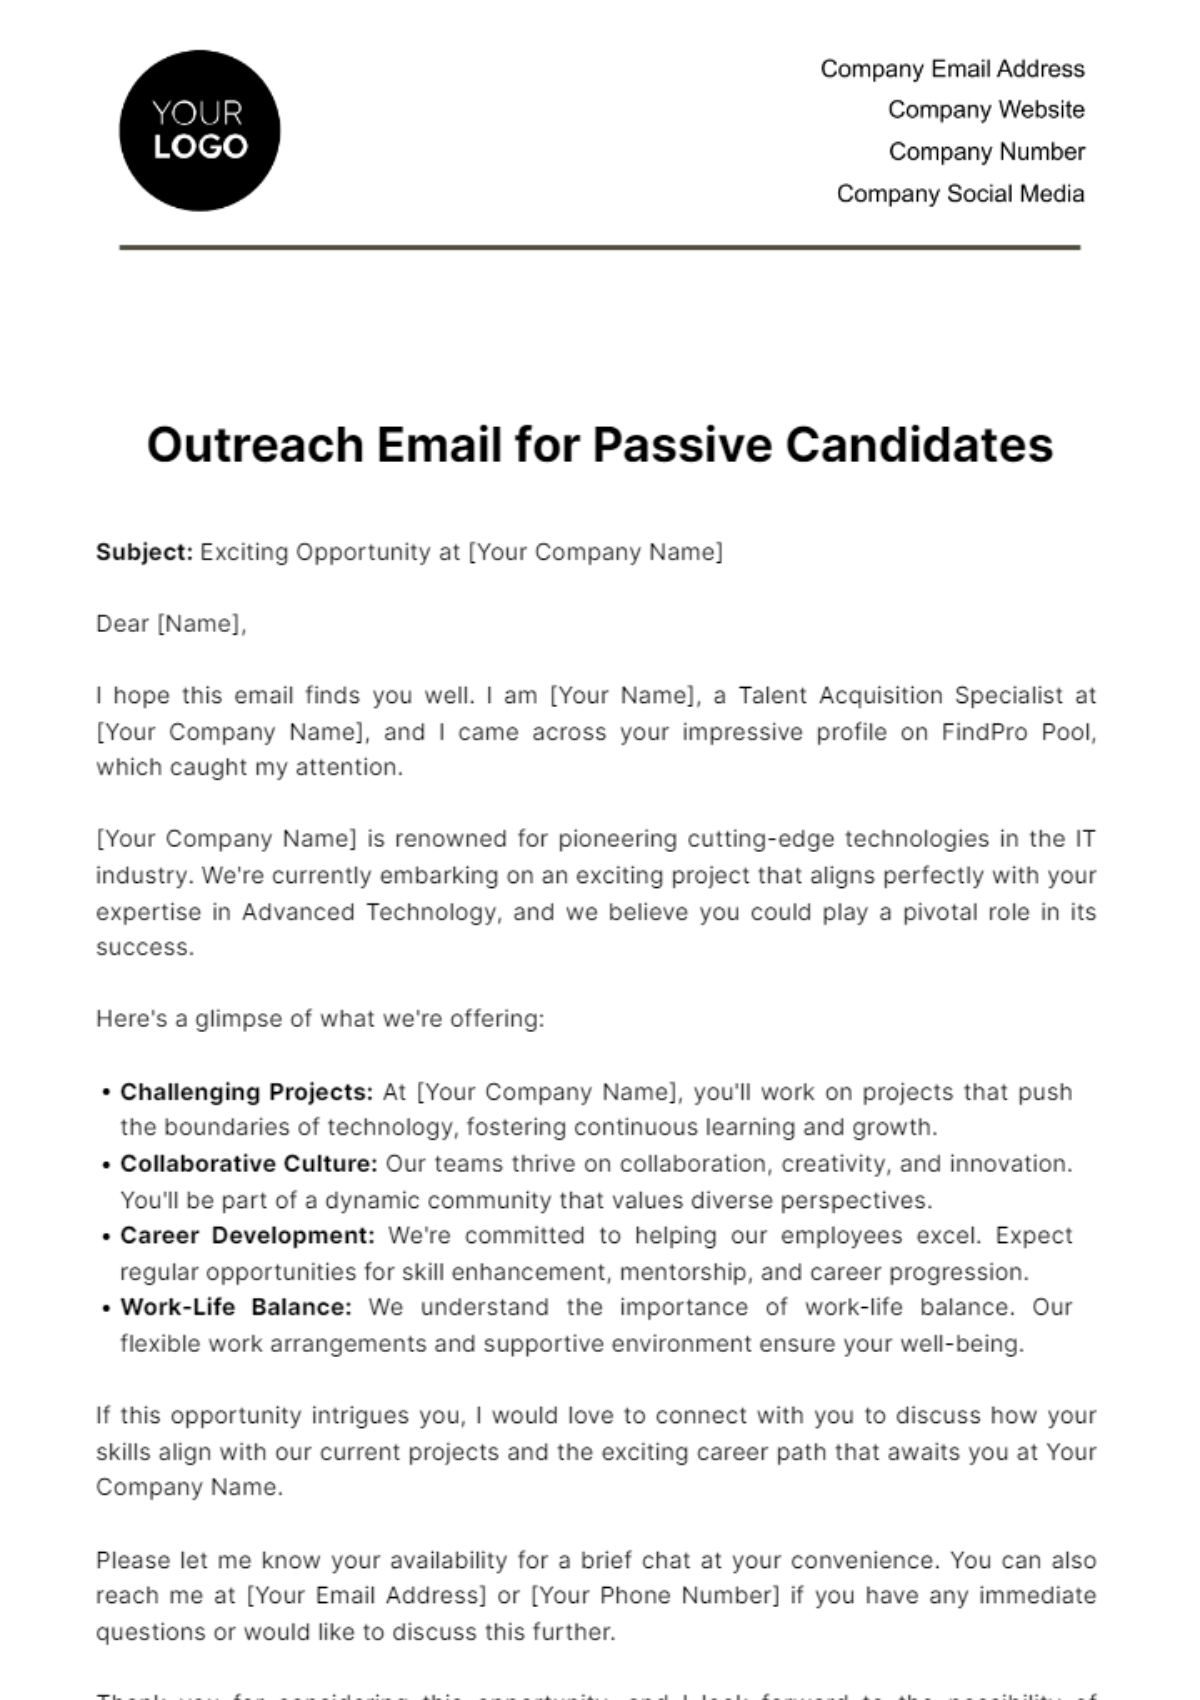 Free Outreach Email Template for Passive Candidates HR Template